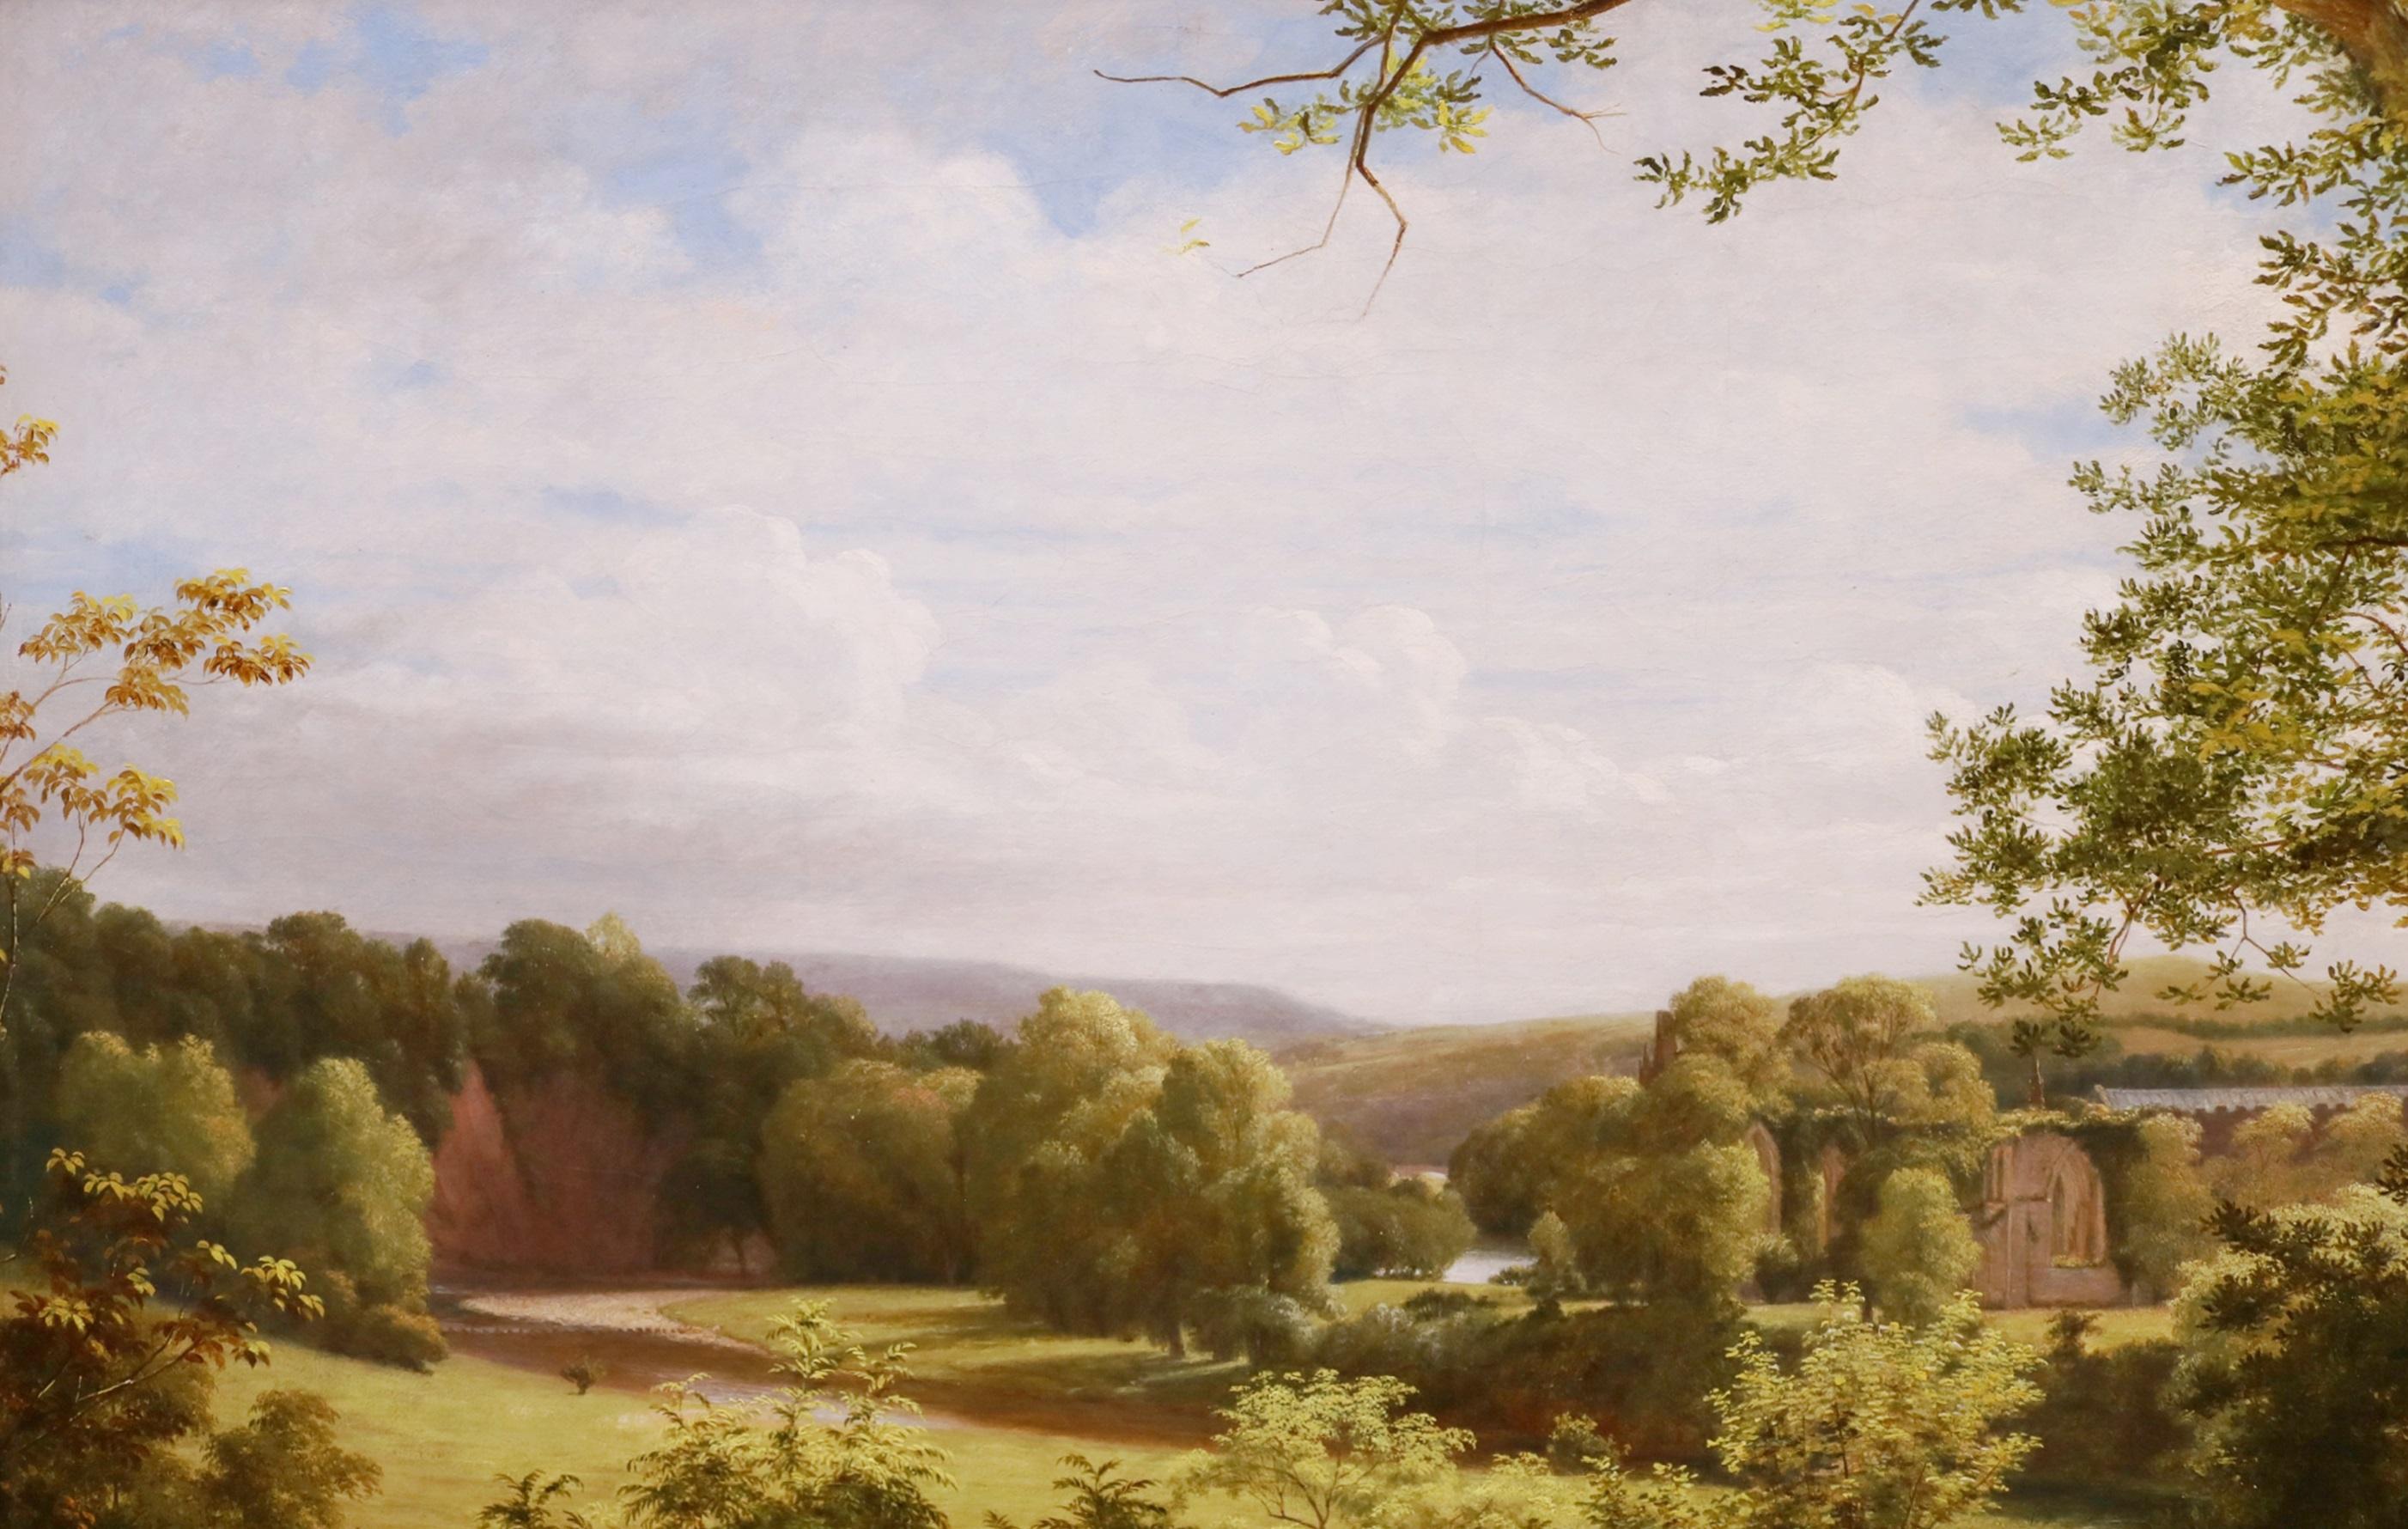 A Day in the County - Large 19th Century Landscape Royal Academy Oil Painting  5